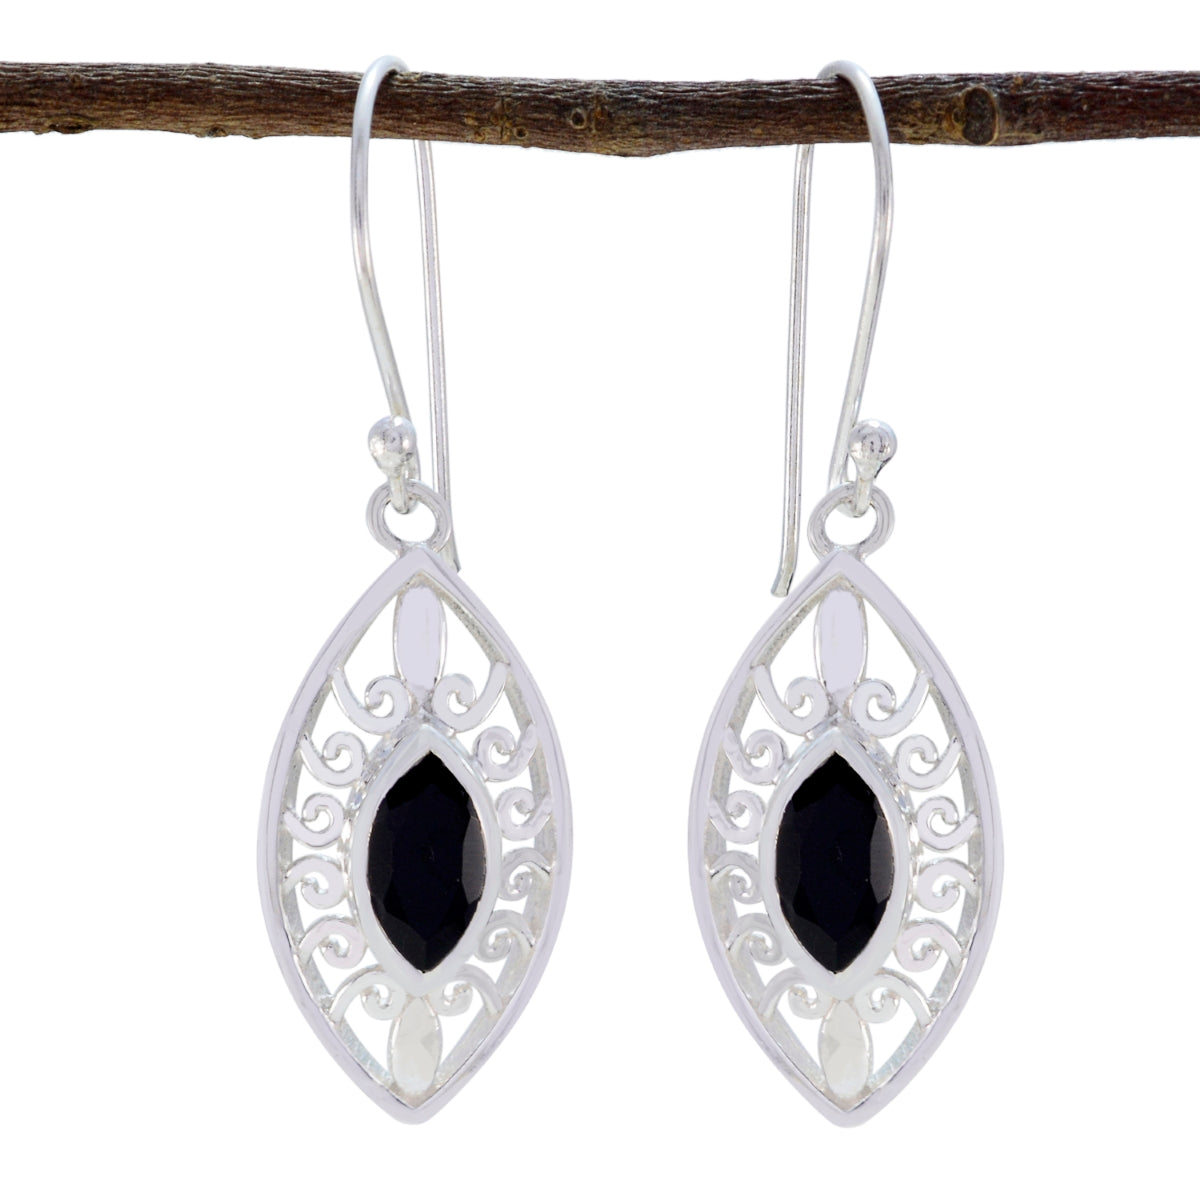 Riyo Real Gemstones Marquise Faceted Black Onyx Silver Earring mothers day gift